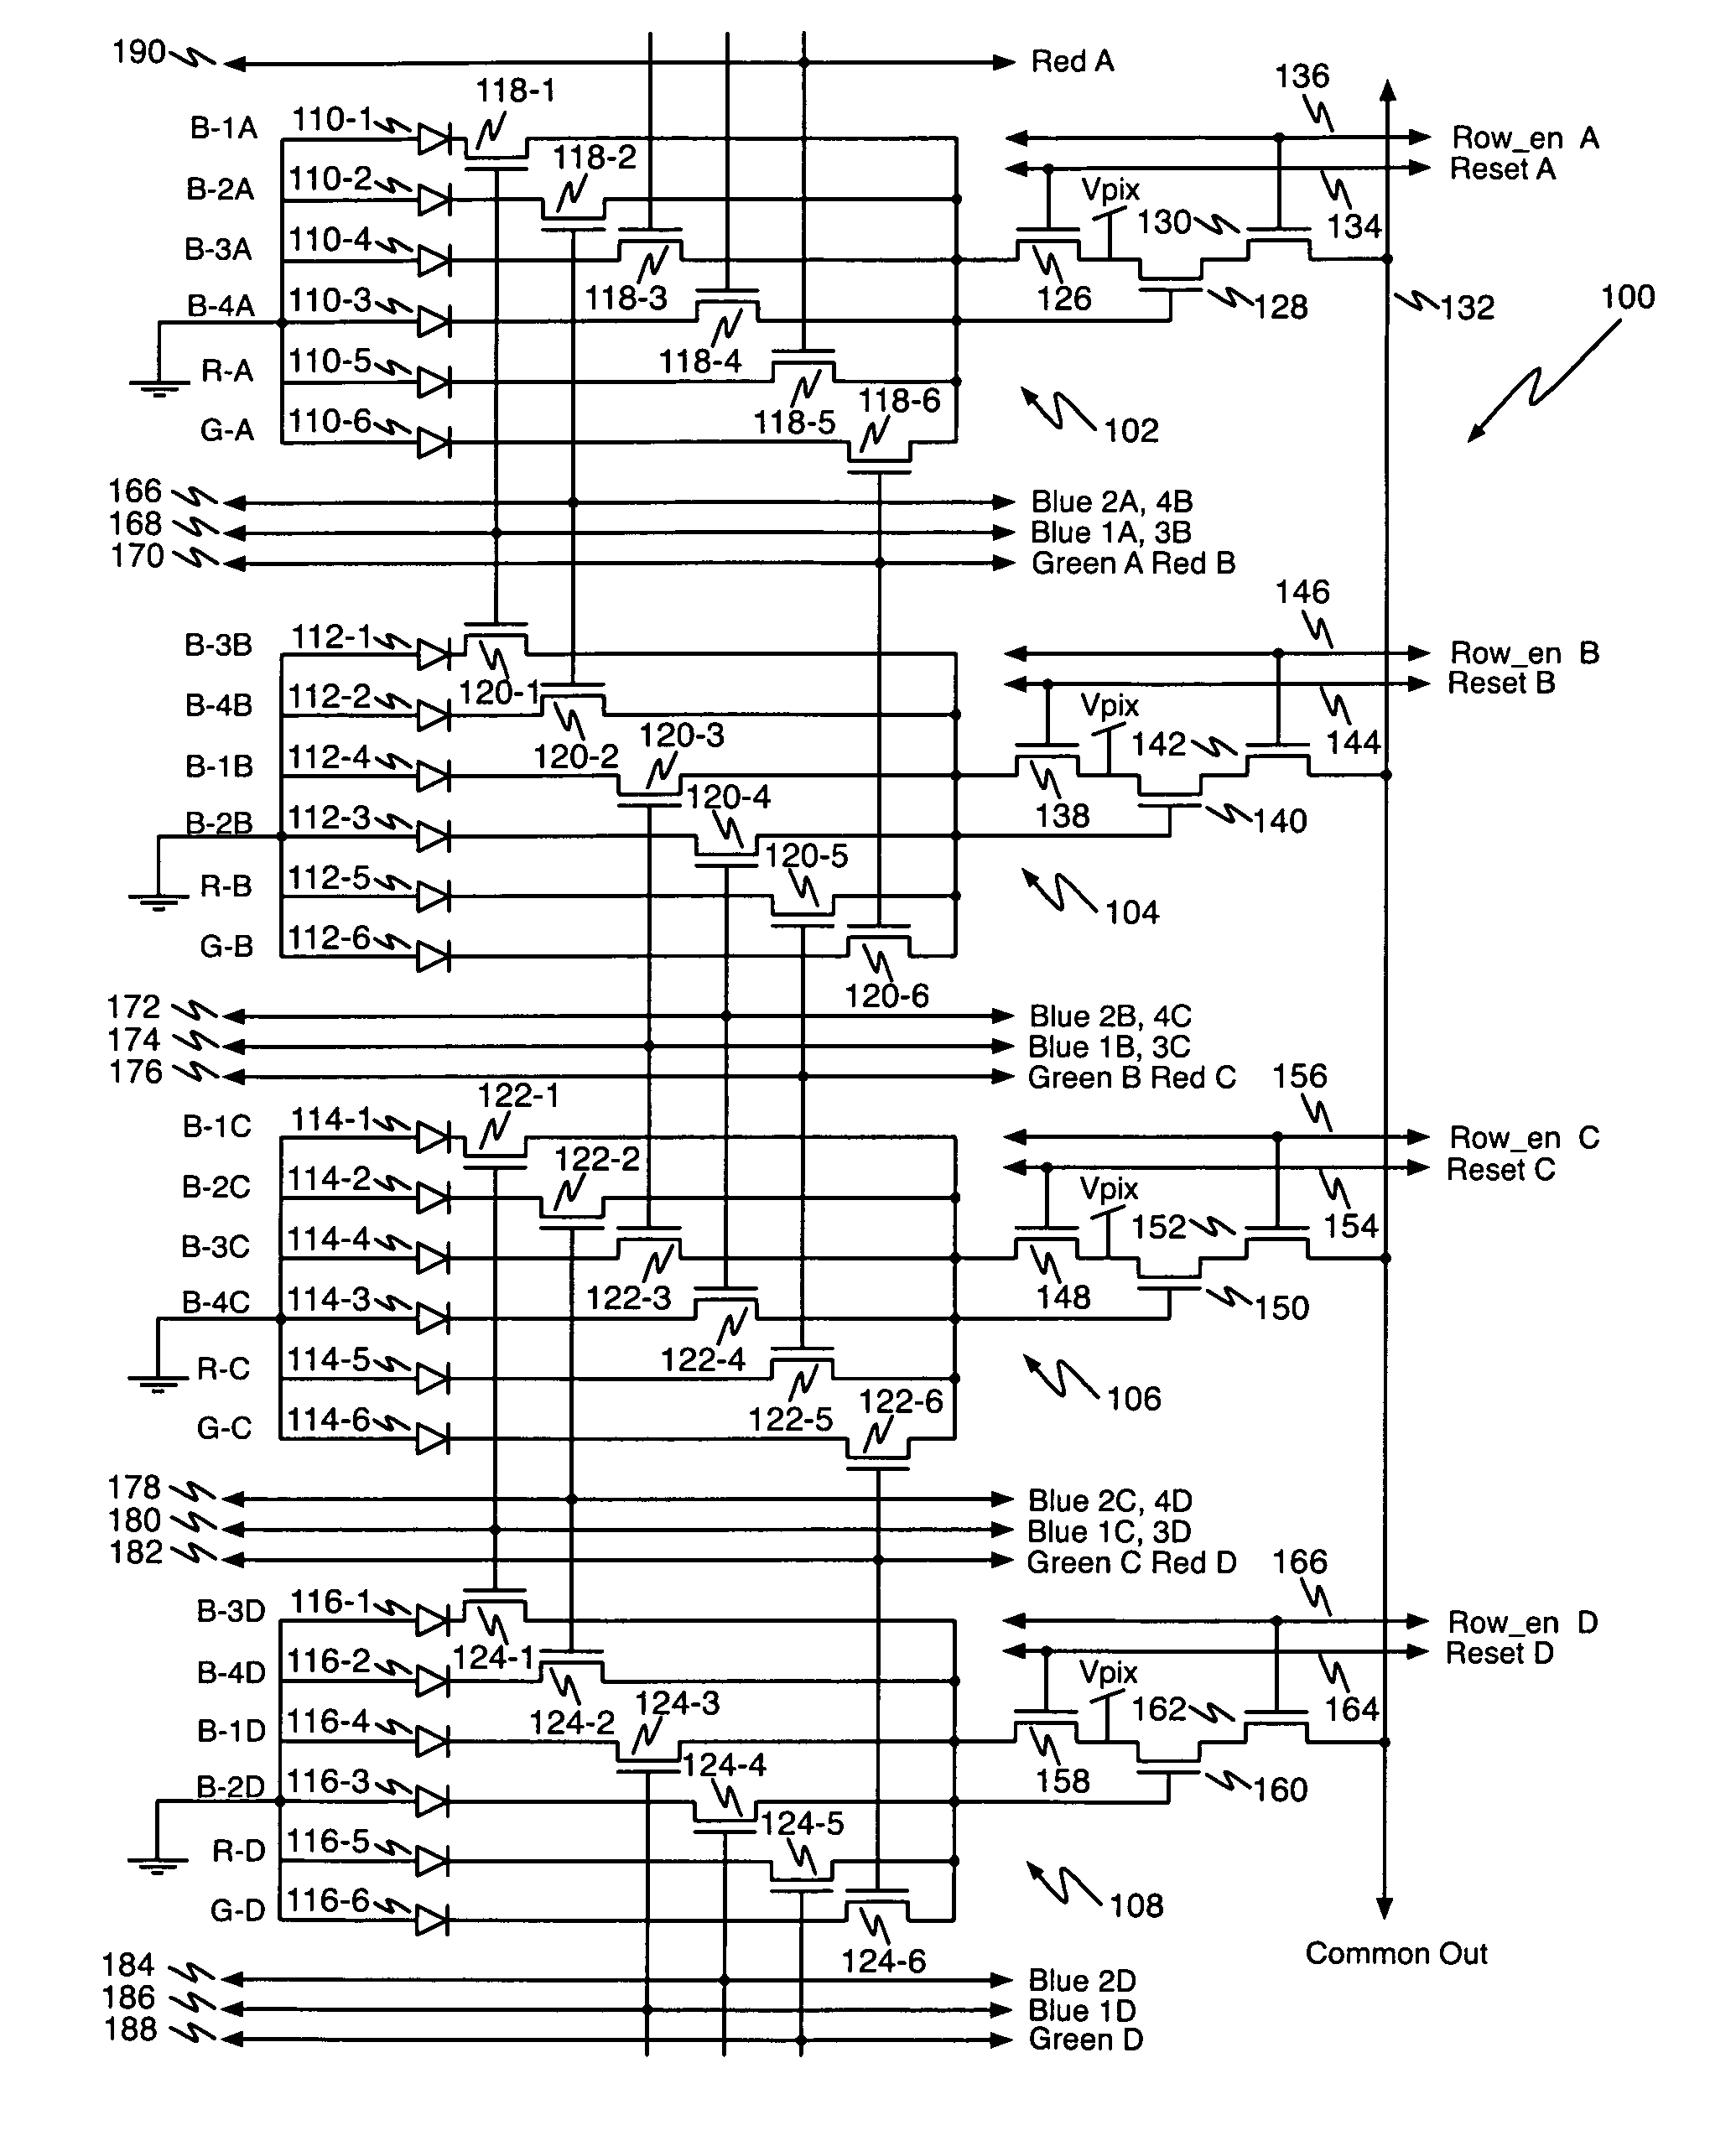 Multi-color CMOS pixel sensor with shared row wiring and dual output lines